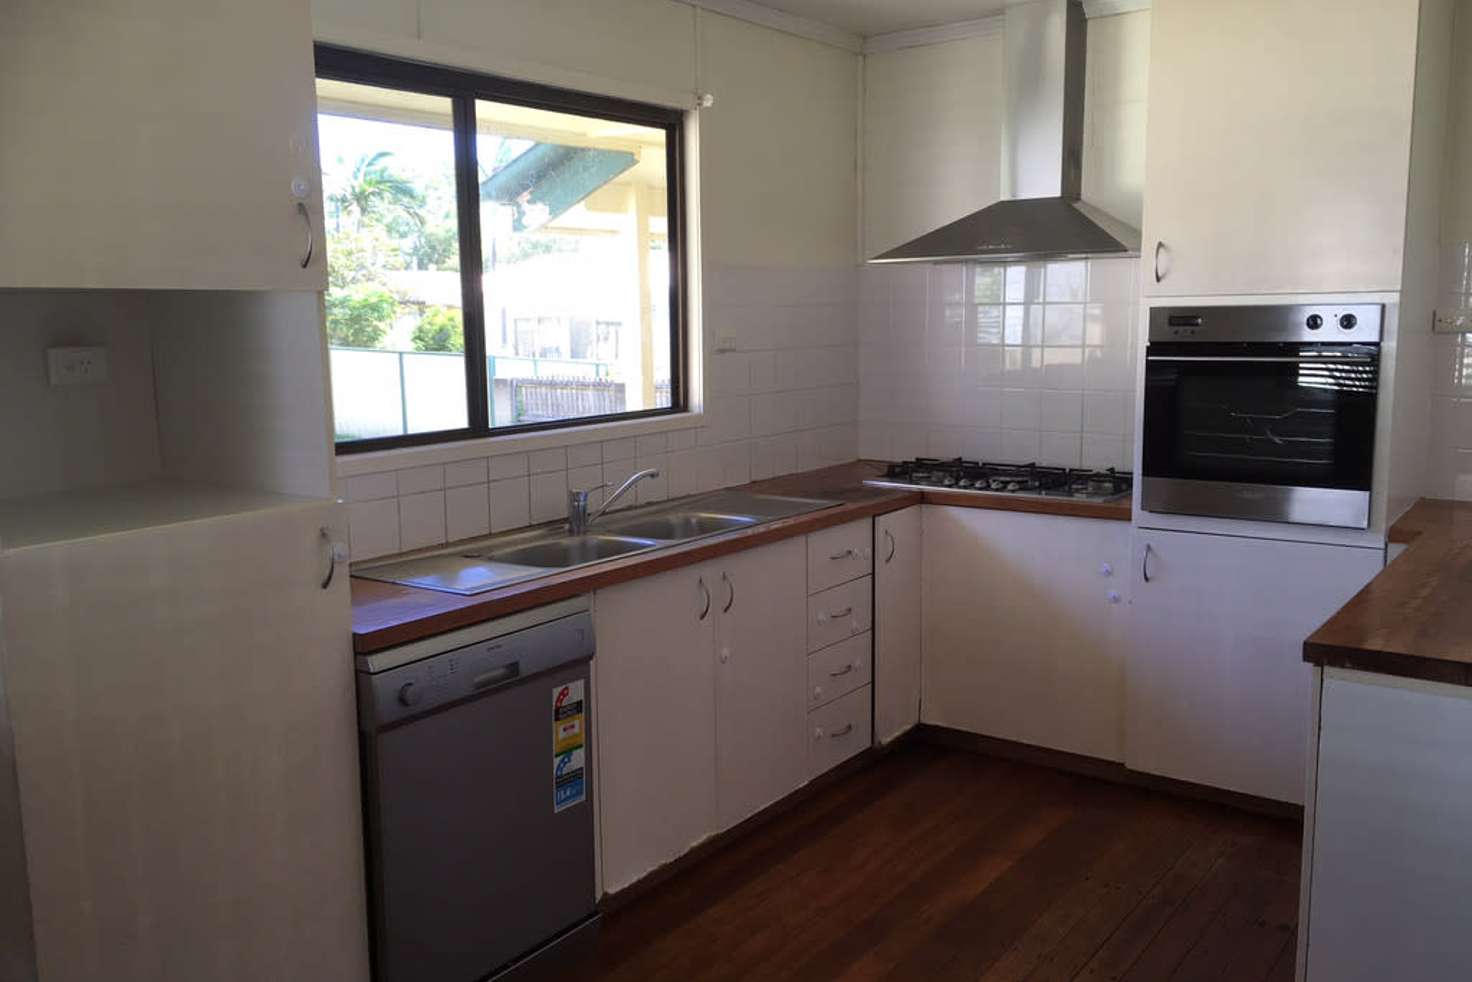 Main view of Homely house listing, 74 Amherst St, Acacia Ridge QLD 4110